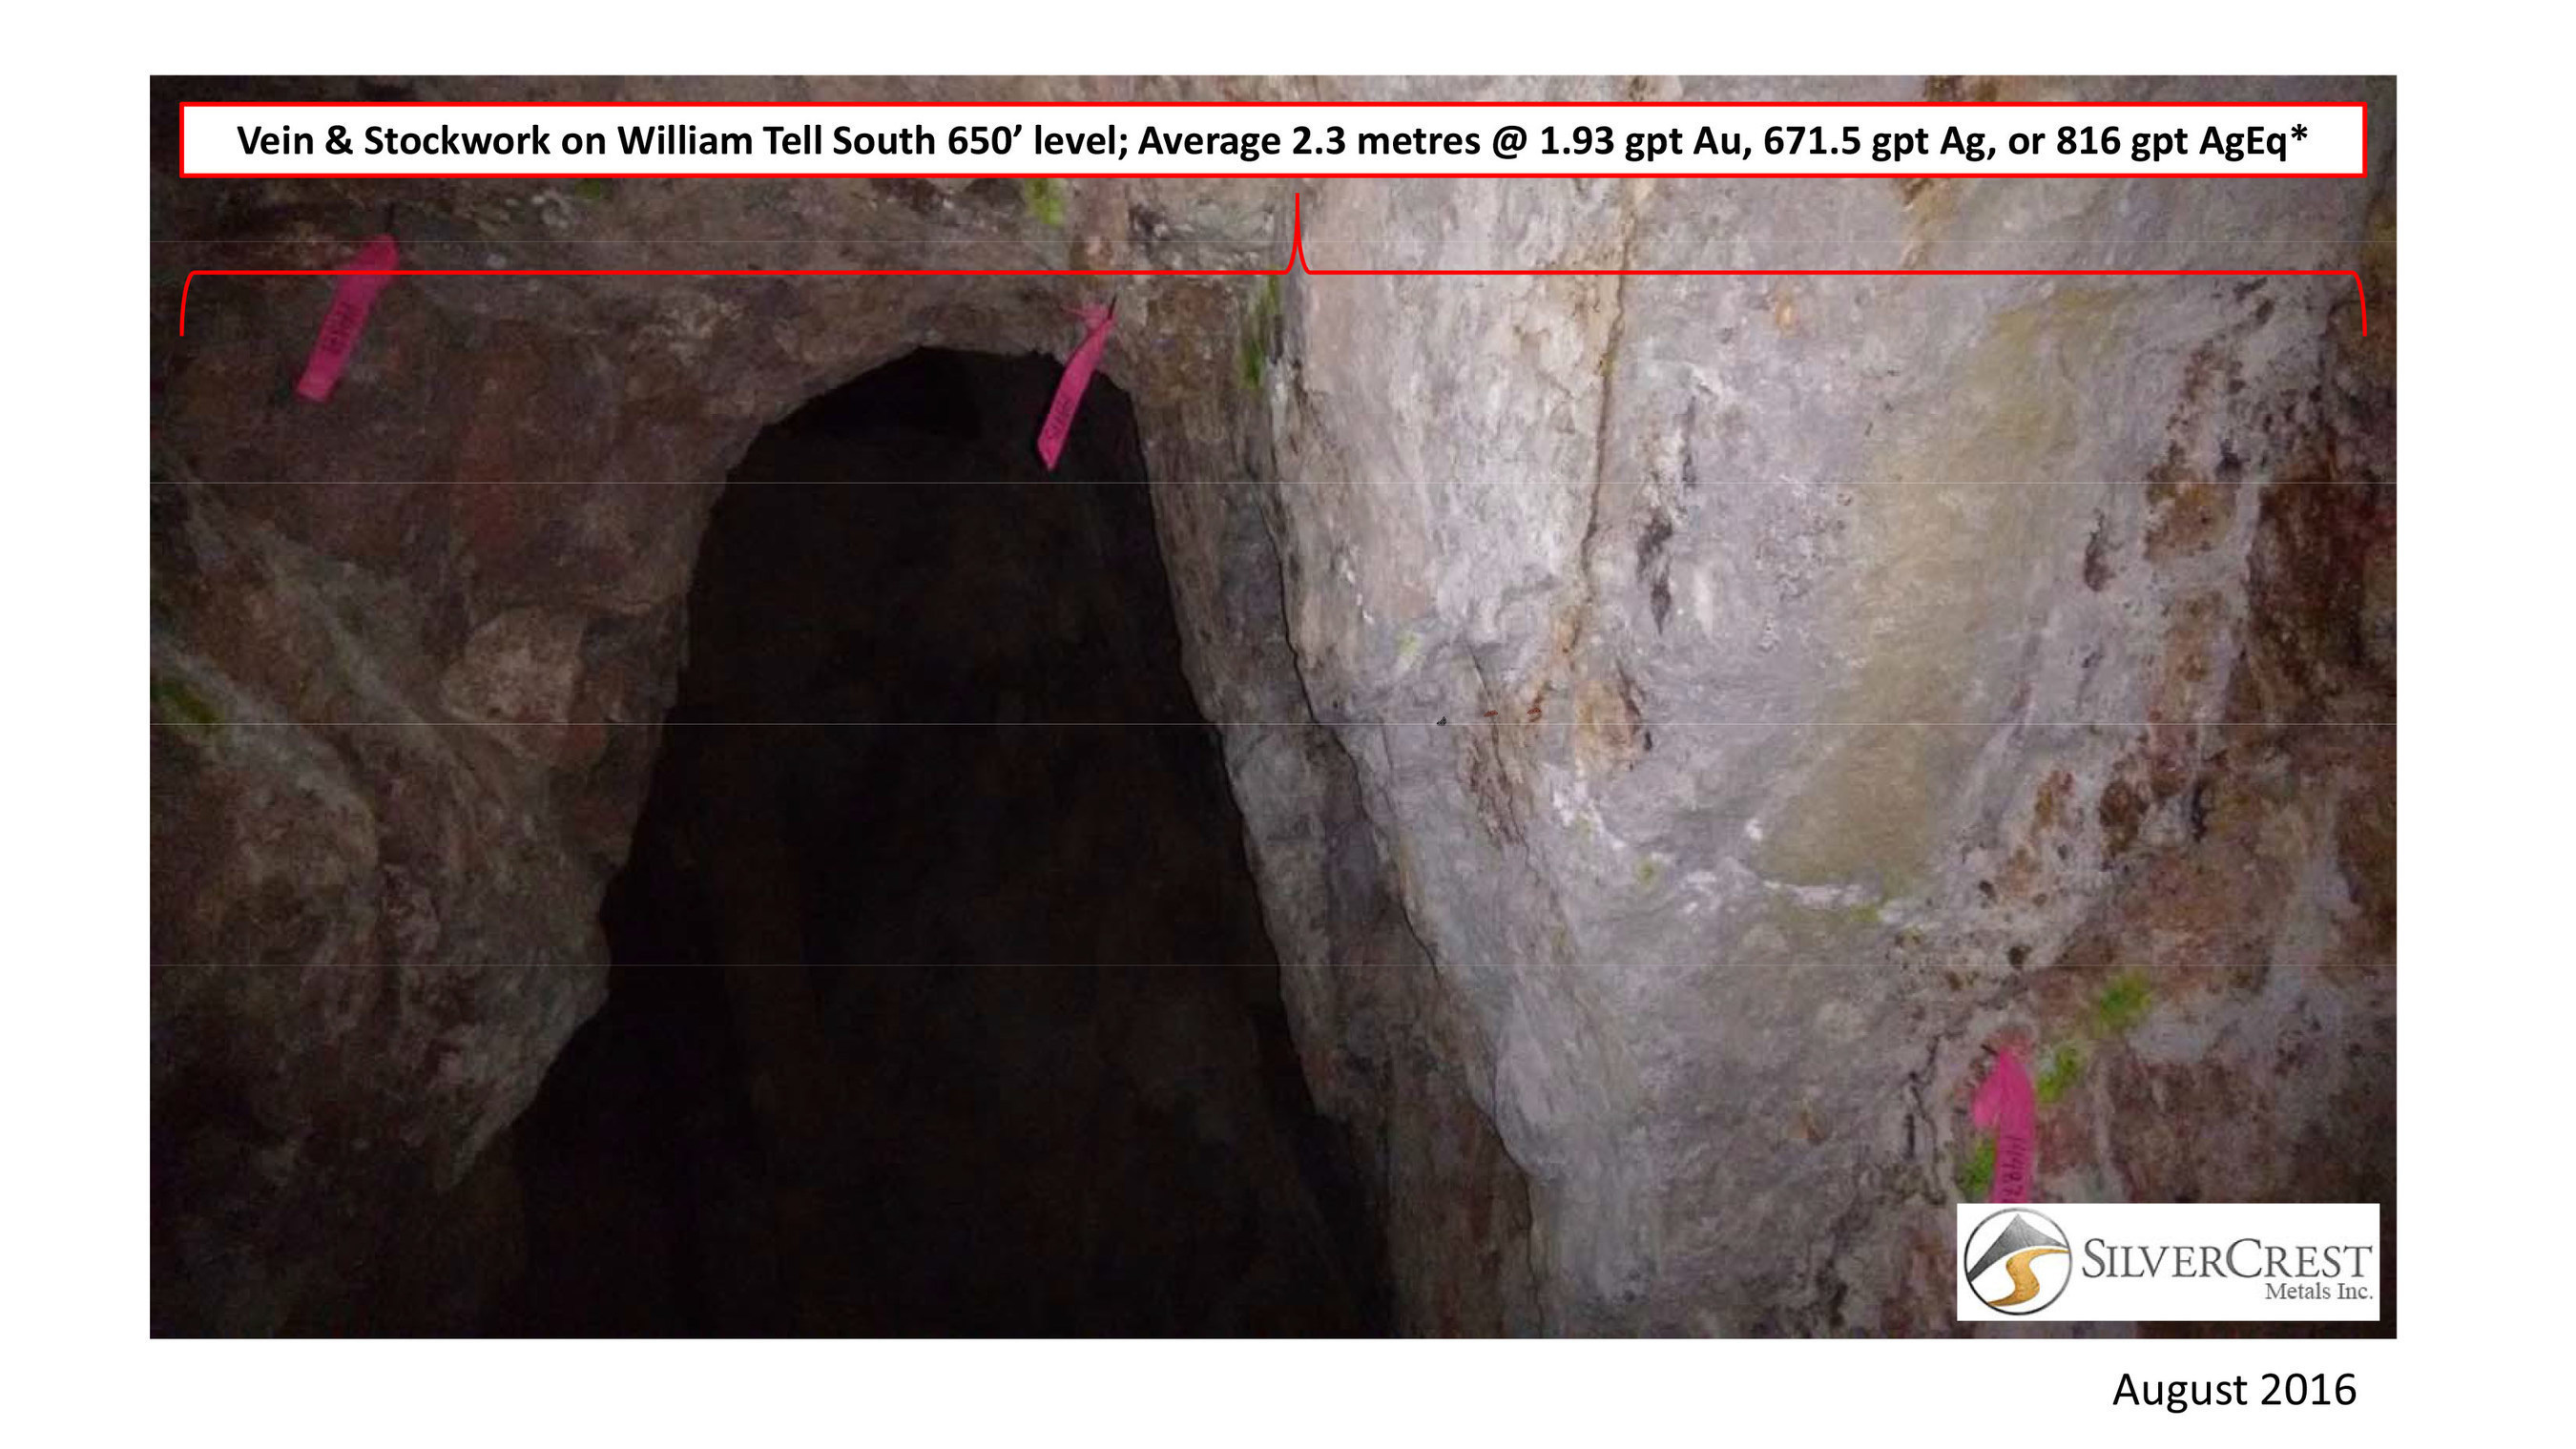 SilverCrest Metals Inc. TSX.V: SIL Las Chispas Project, Sonora, Mexico - Vein & Stockwork on William Tell South 650' level; Average 2.3 metres @1.93 gpt Au, 671.5 gpt Ag, or 816 gpt AgEq